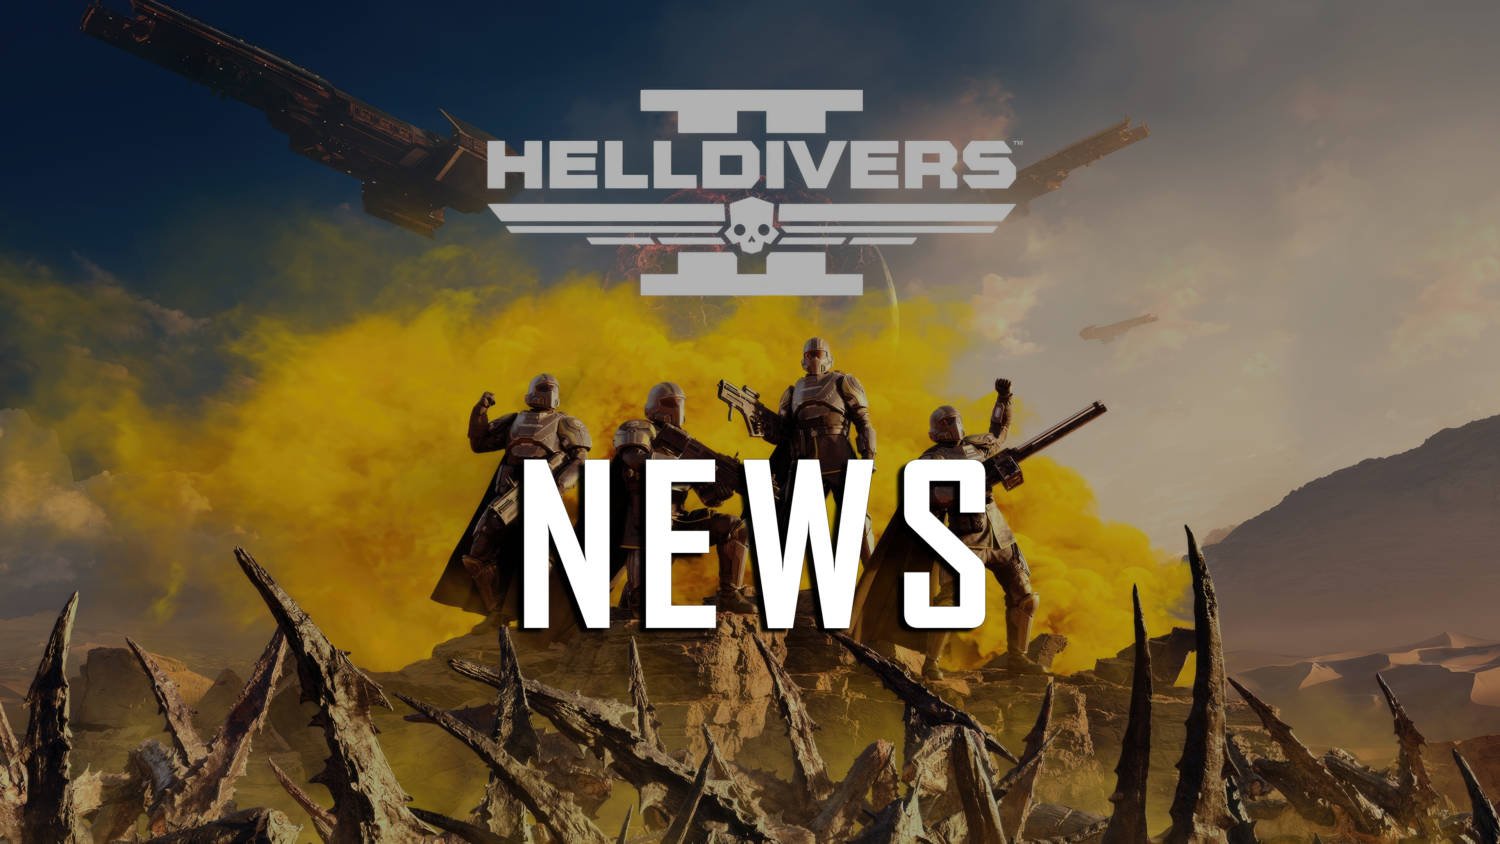 helldivers-2-campaign-concludes-a-valorous-effort-overcome-by-automaton-menace